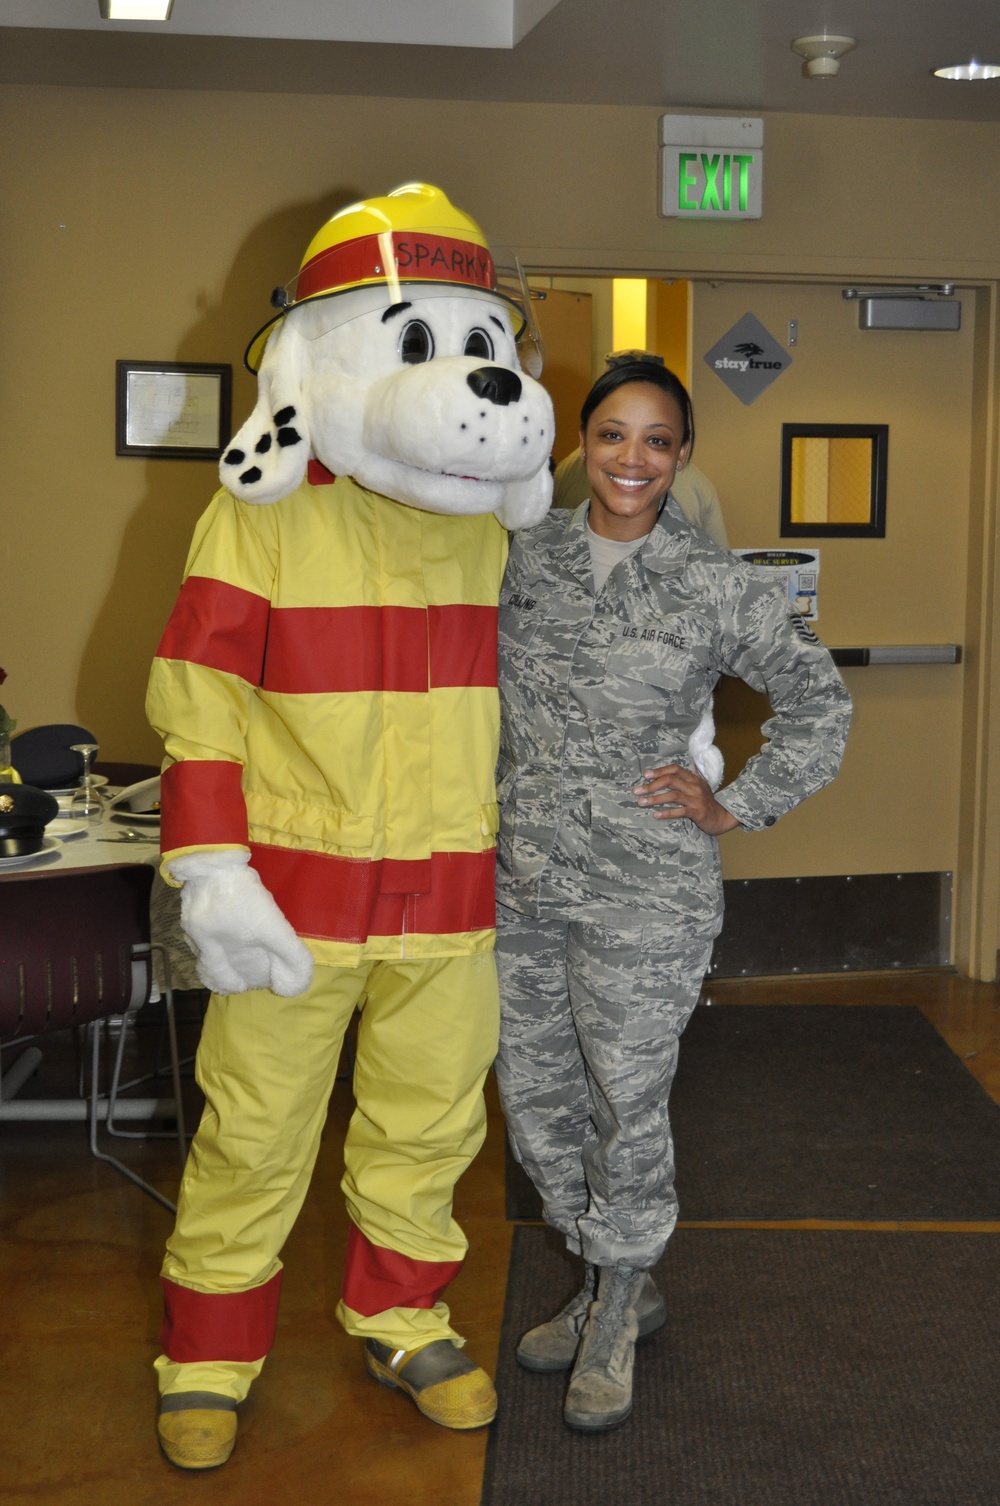 Sparky the Fire Dog visits the 152nd Airlift Wing to spread fire safety awareness